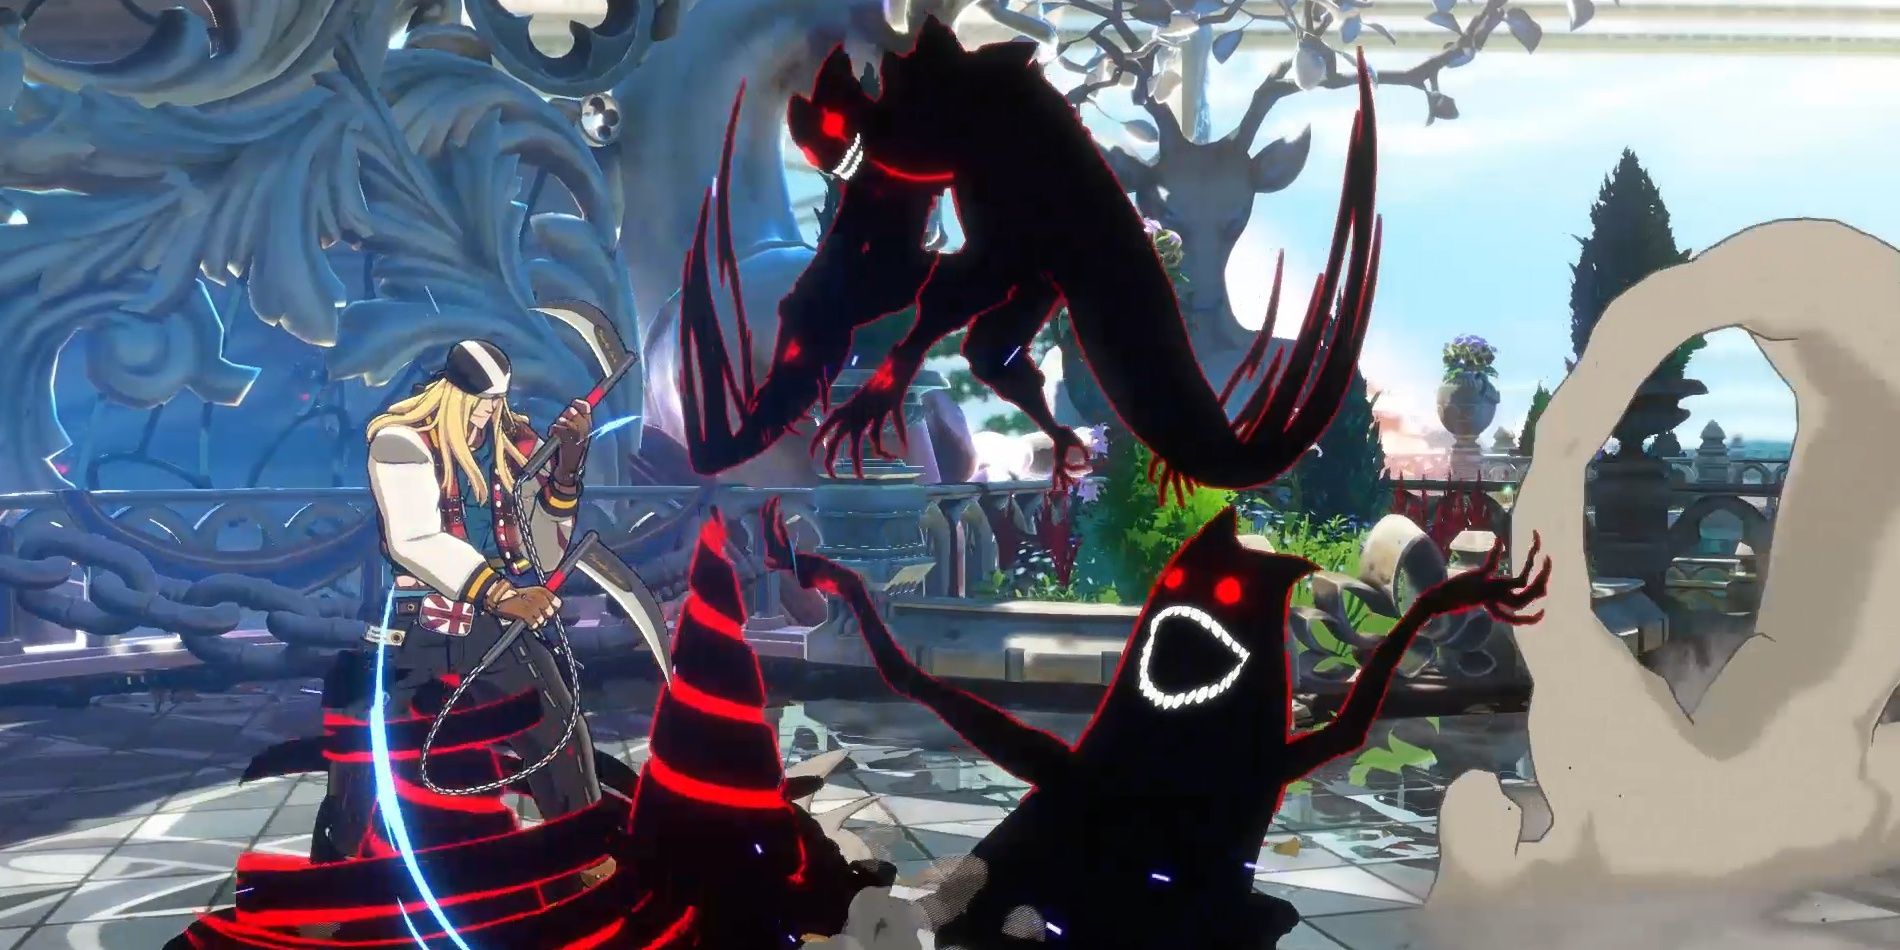 Zato-1 controlling his alter ego (and shadow) Eddie, forming him into monsters and spikes in Guilty Gear -Strive-